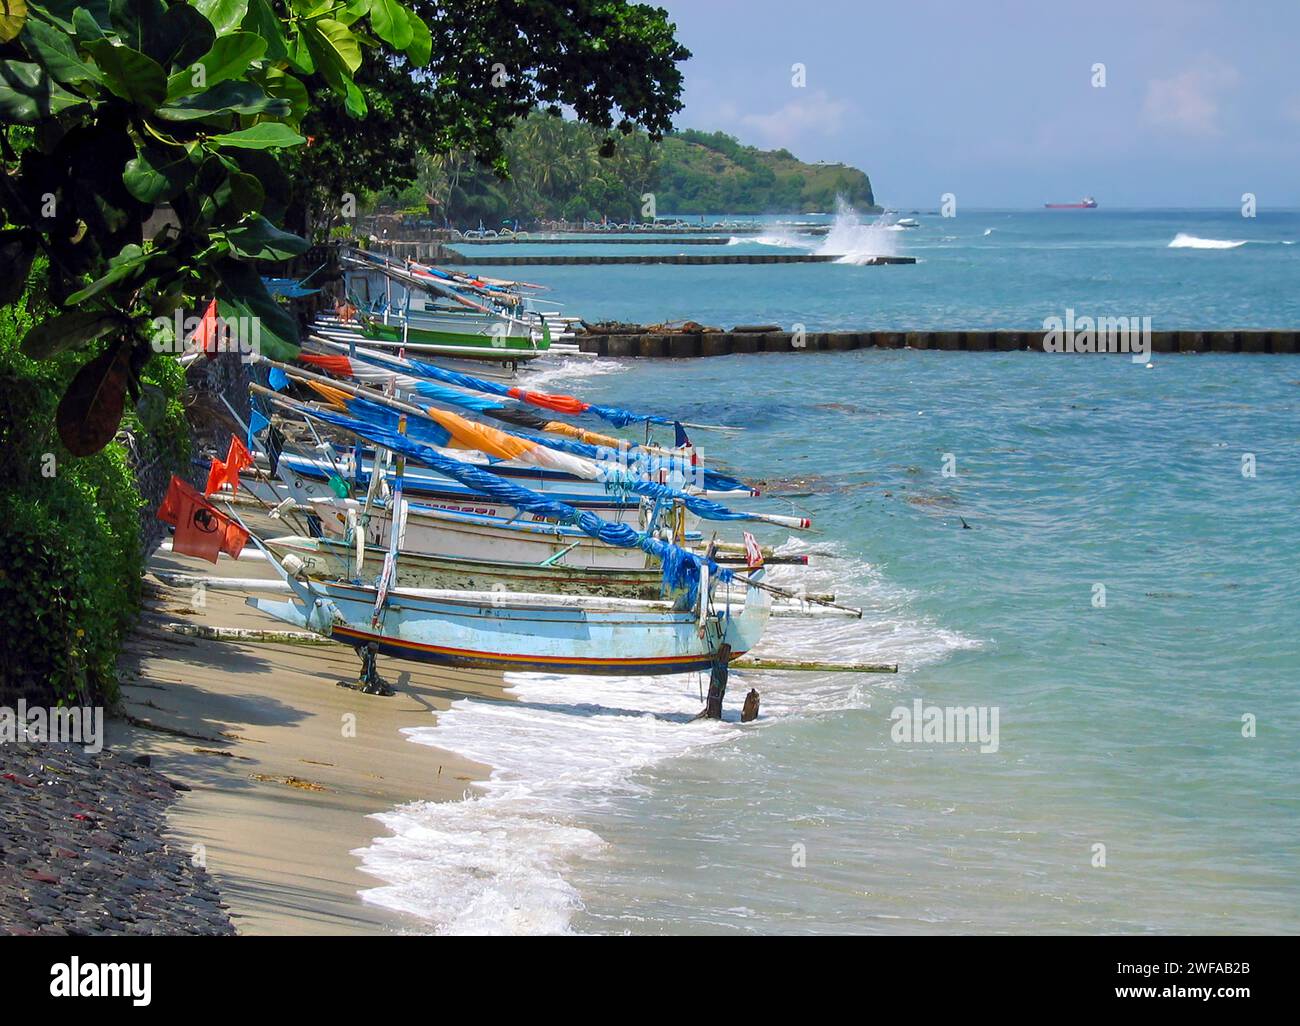 Traditional wooden Balinese fishing boats lined up on the beach at Candidasa or Candi Dasa in Bali, Indonesia. Stock Photo